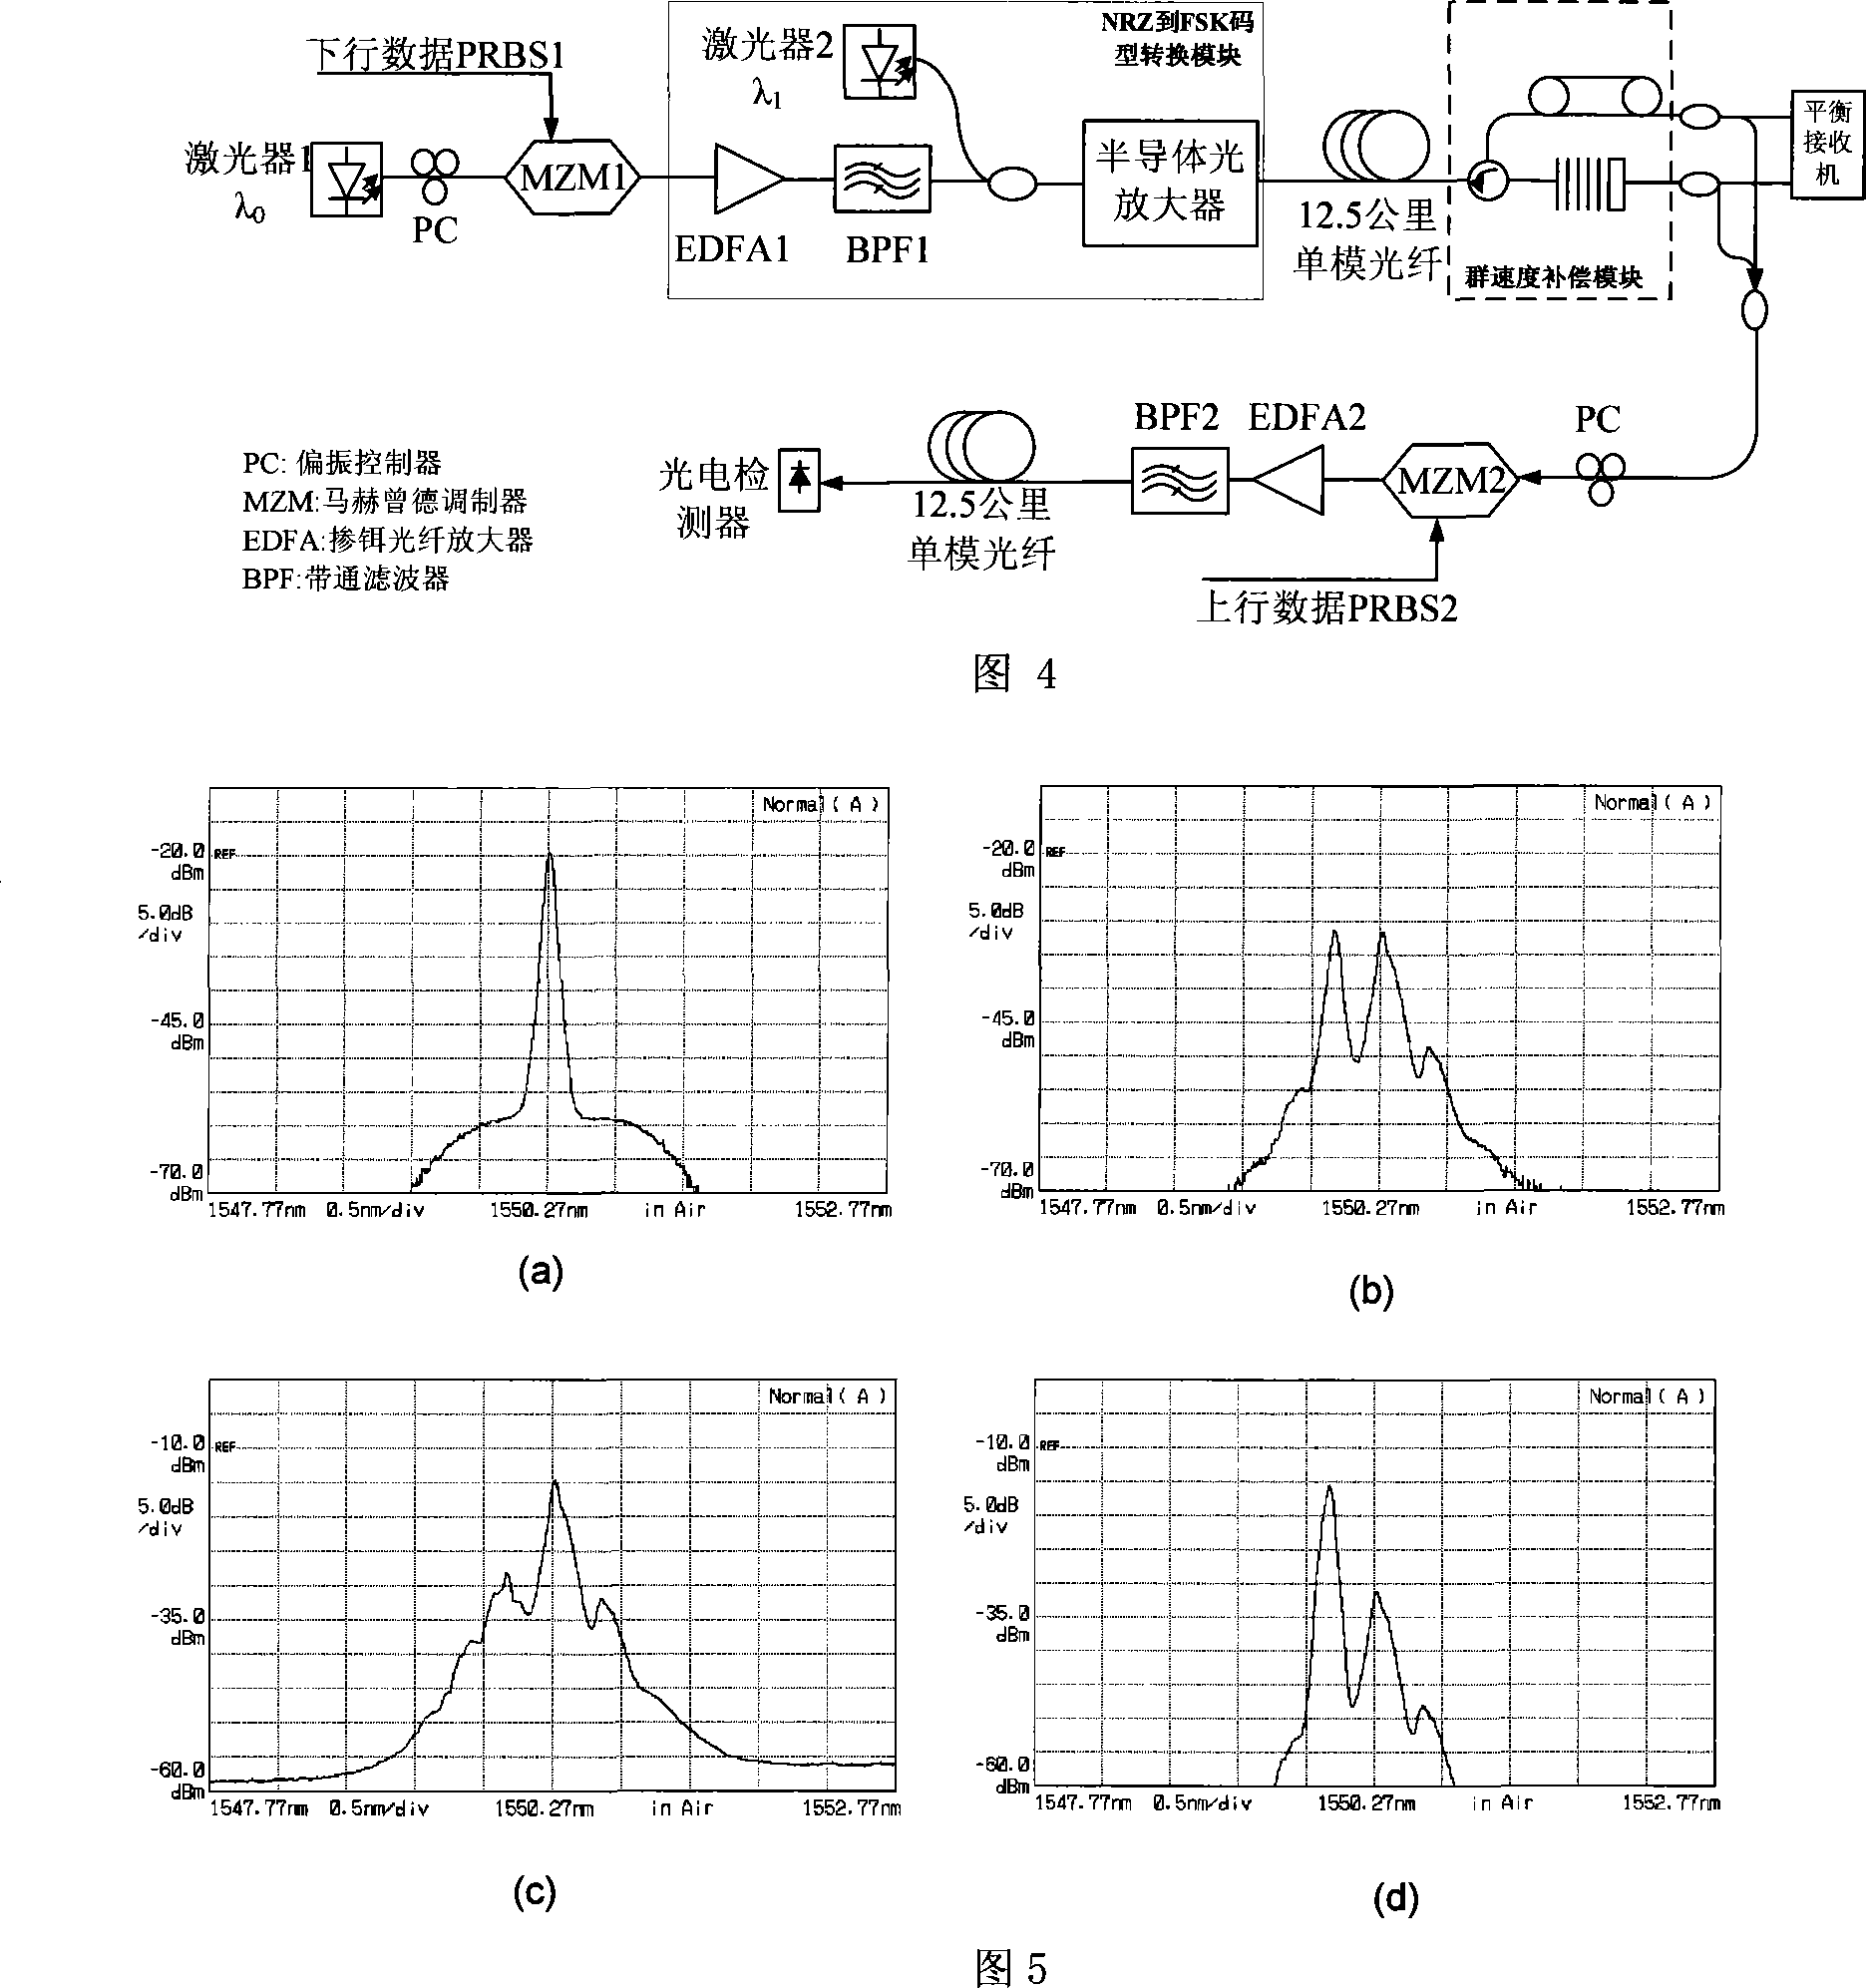 Full optical network networking system for passive light network and MAN